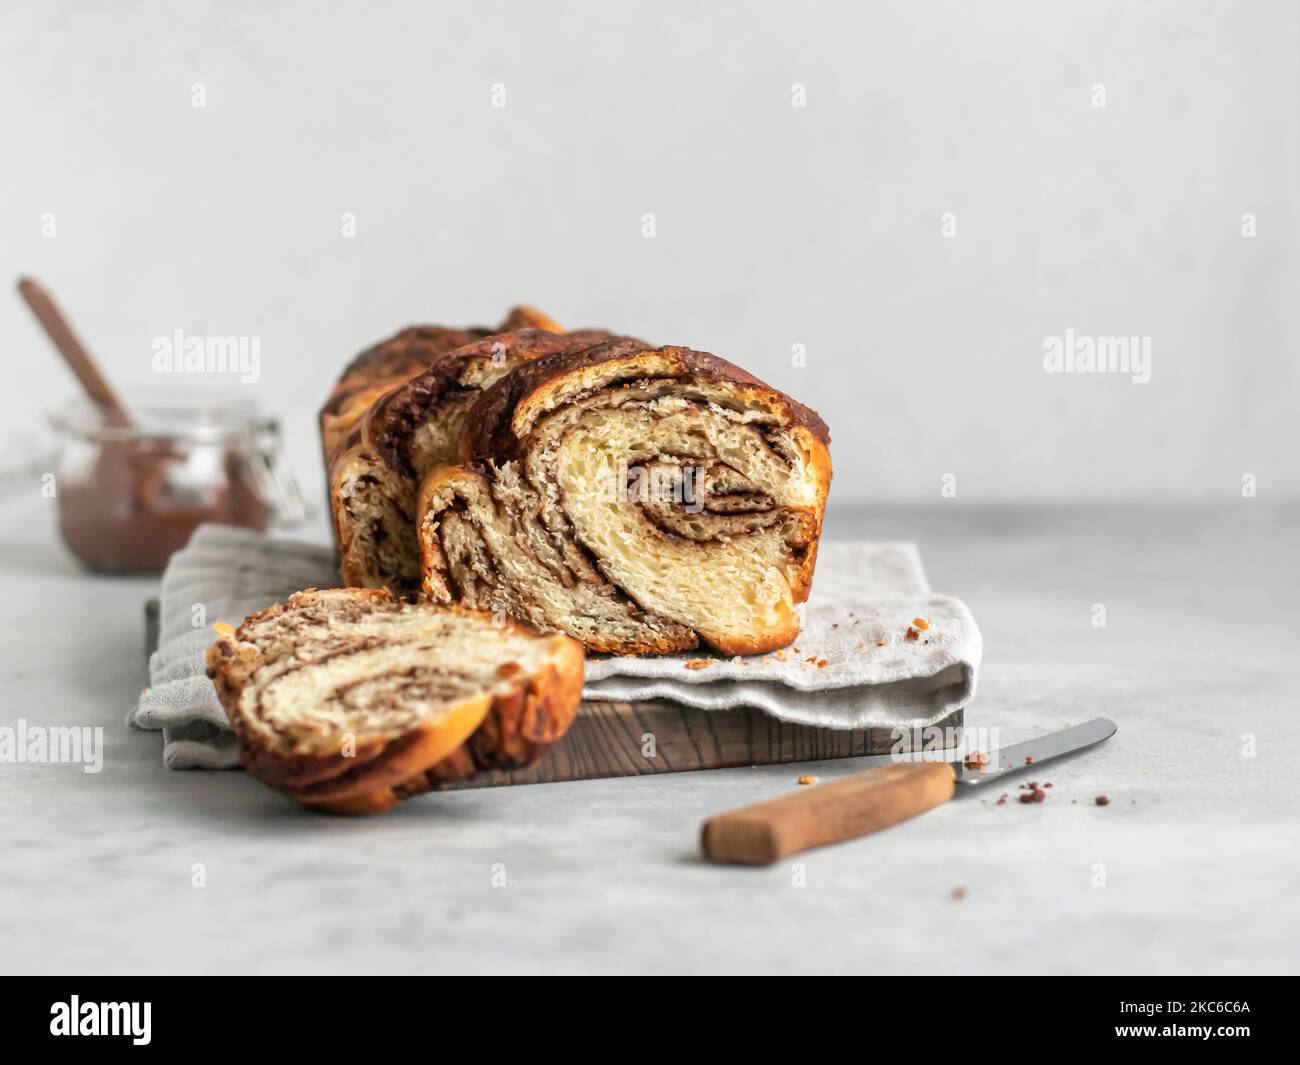 Chocolate yeast cake babka, swirl marbled brioche with chocolate on gray background with text space Stock Photo